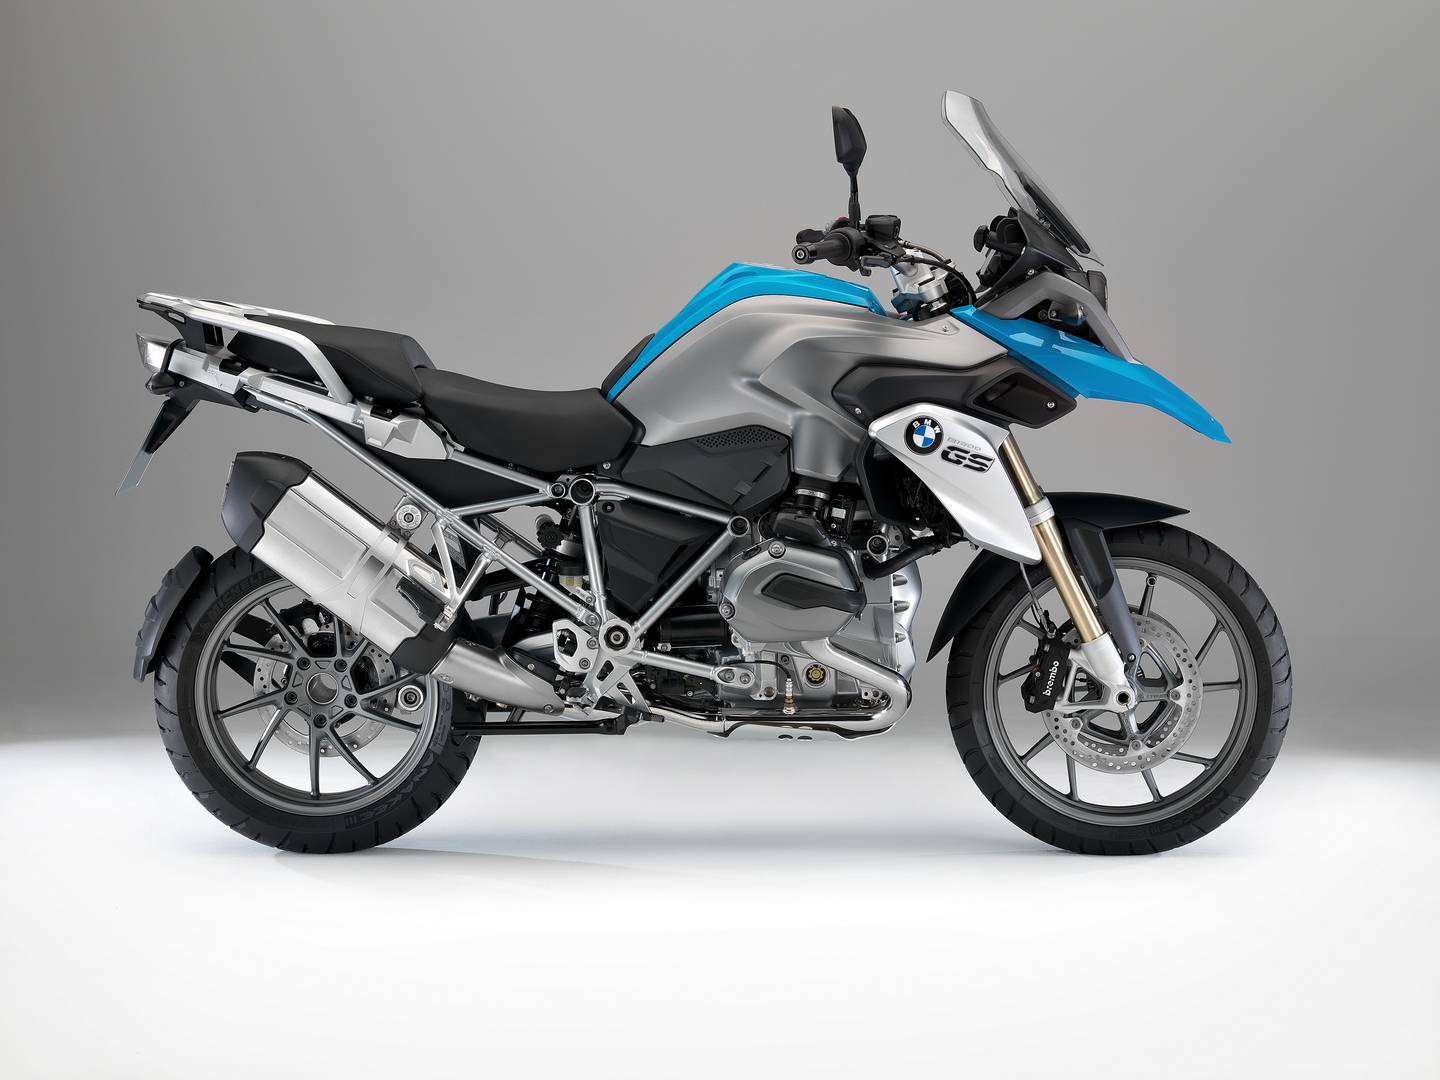 2013-bmw-1200-gs-looks-awesome-photo-gallery_2